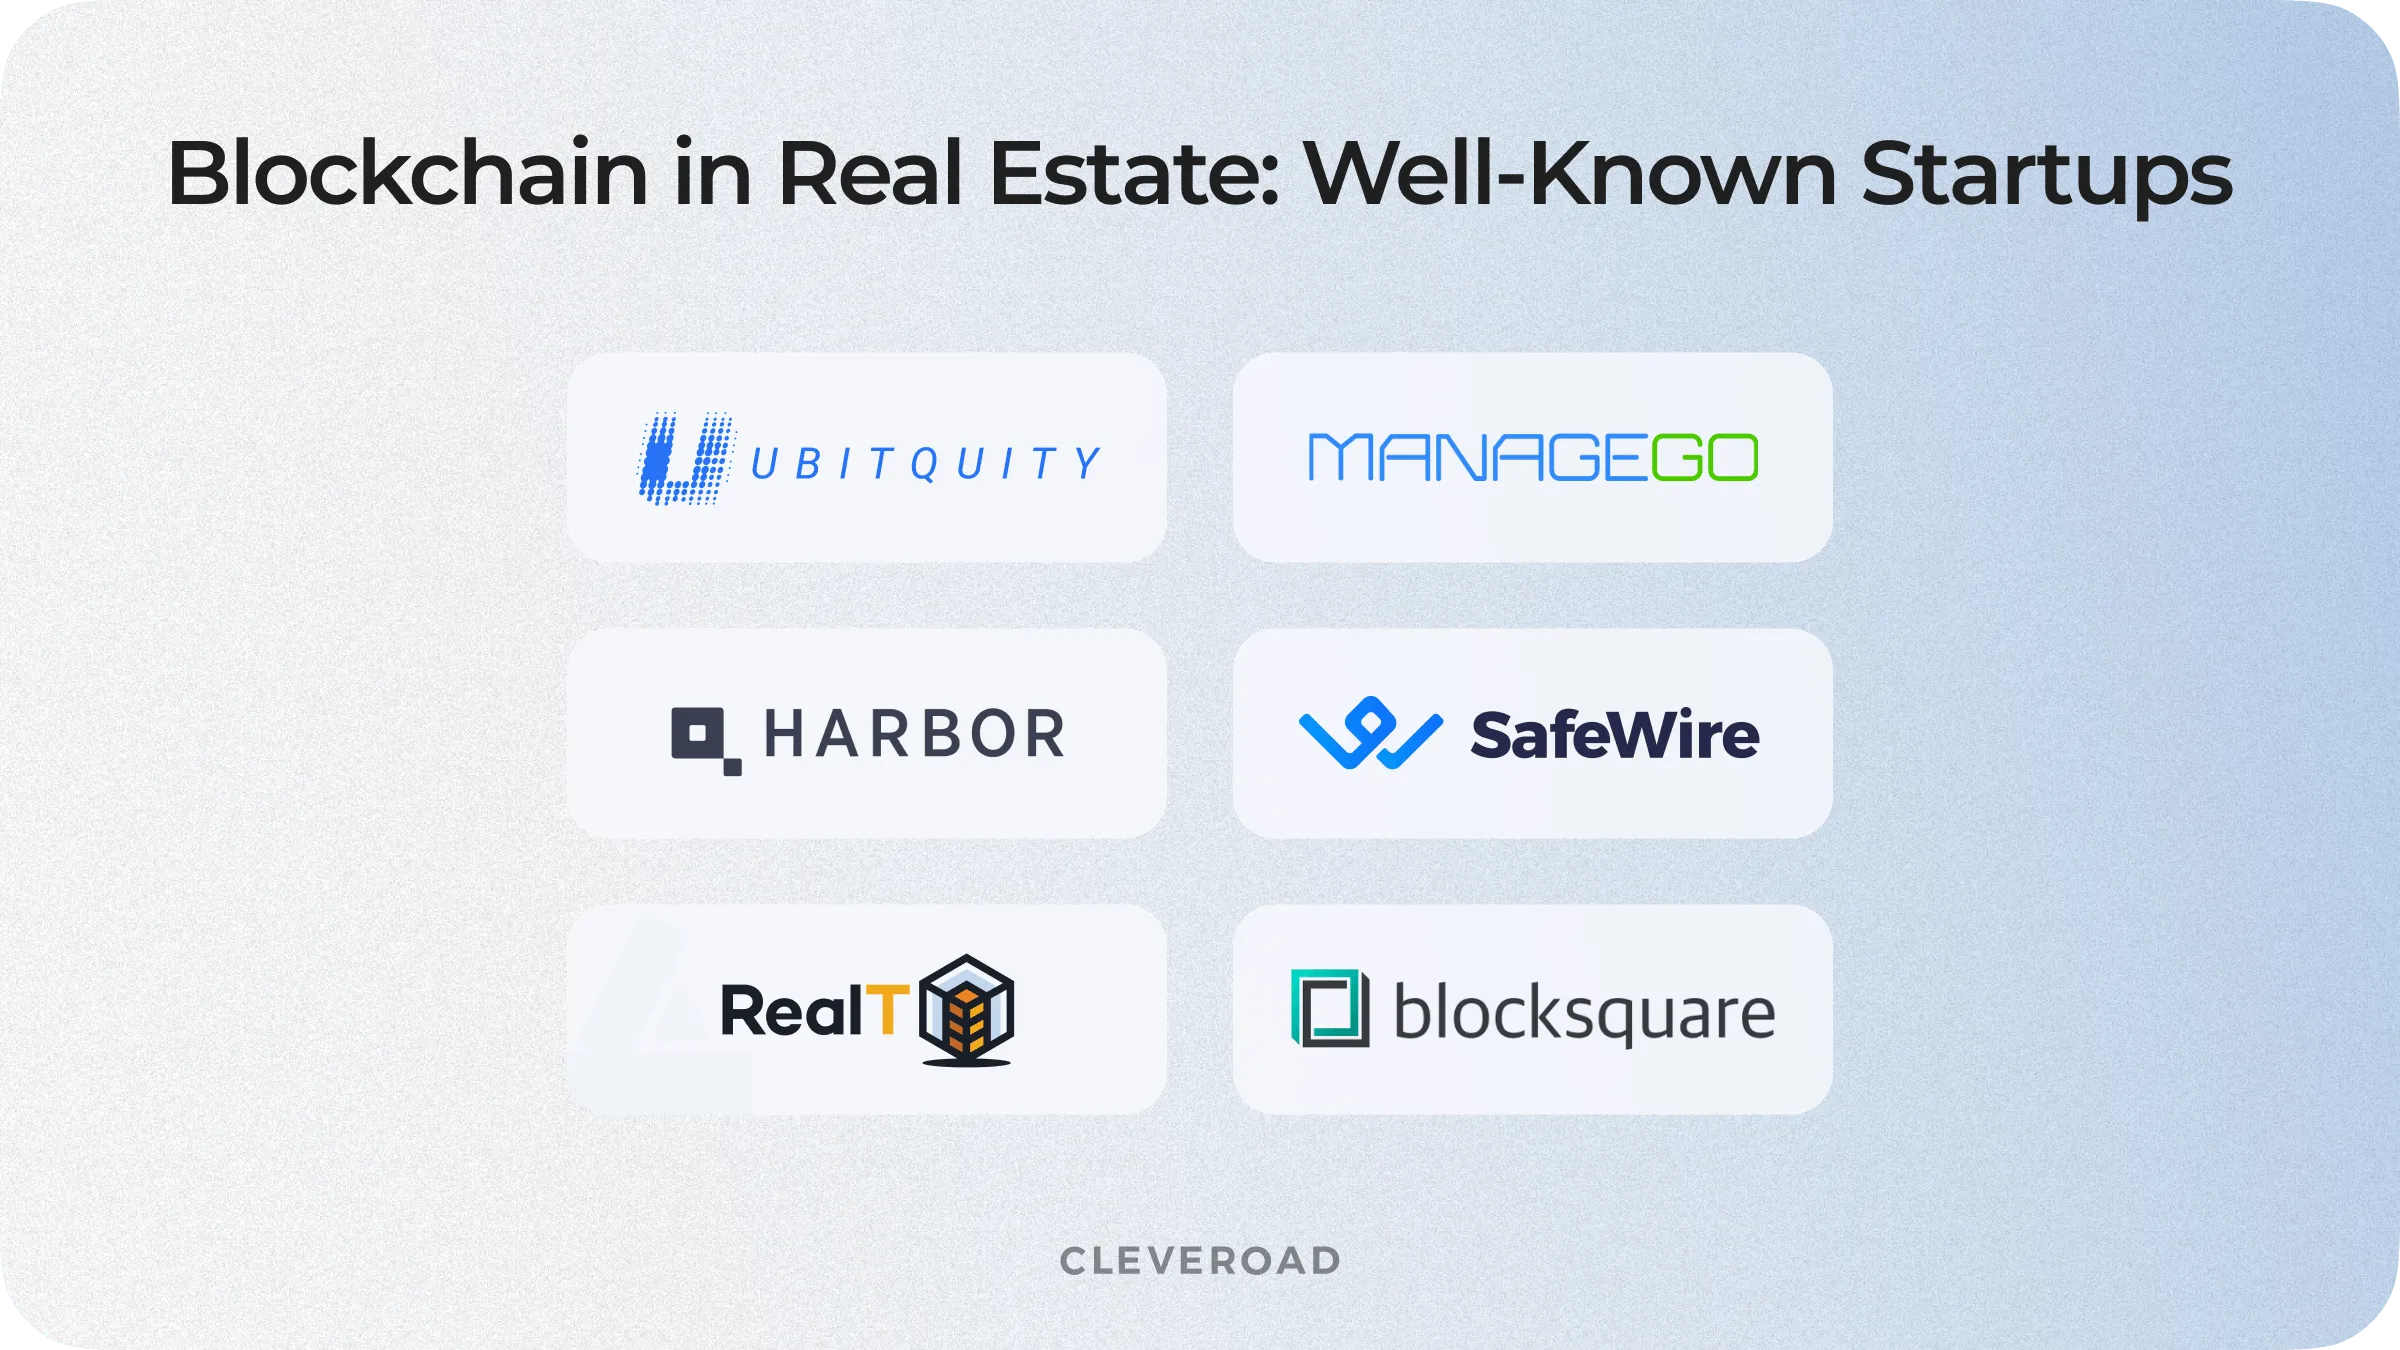 What blockchain real estate companies are there?